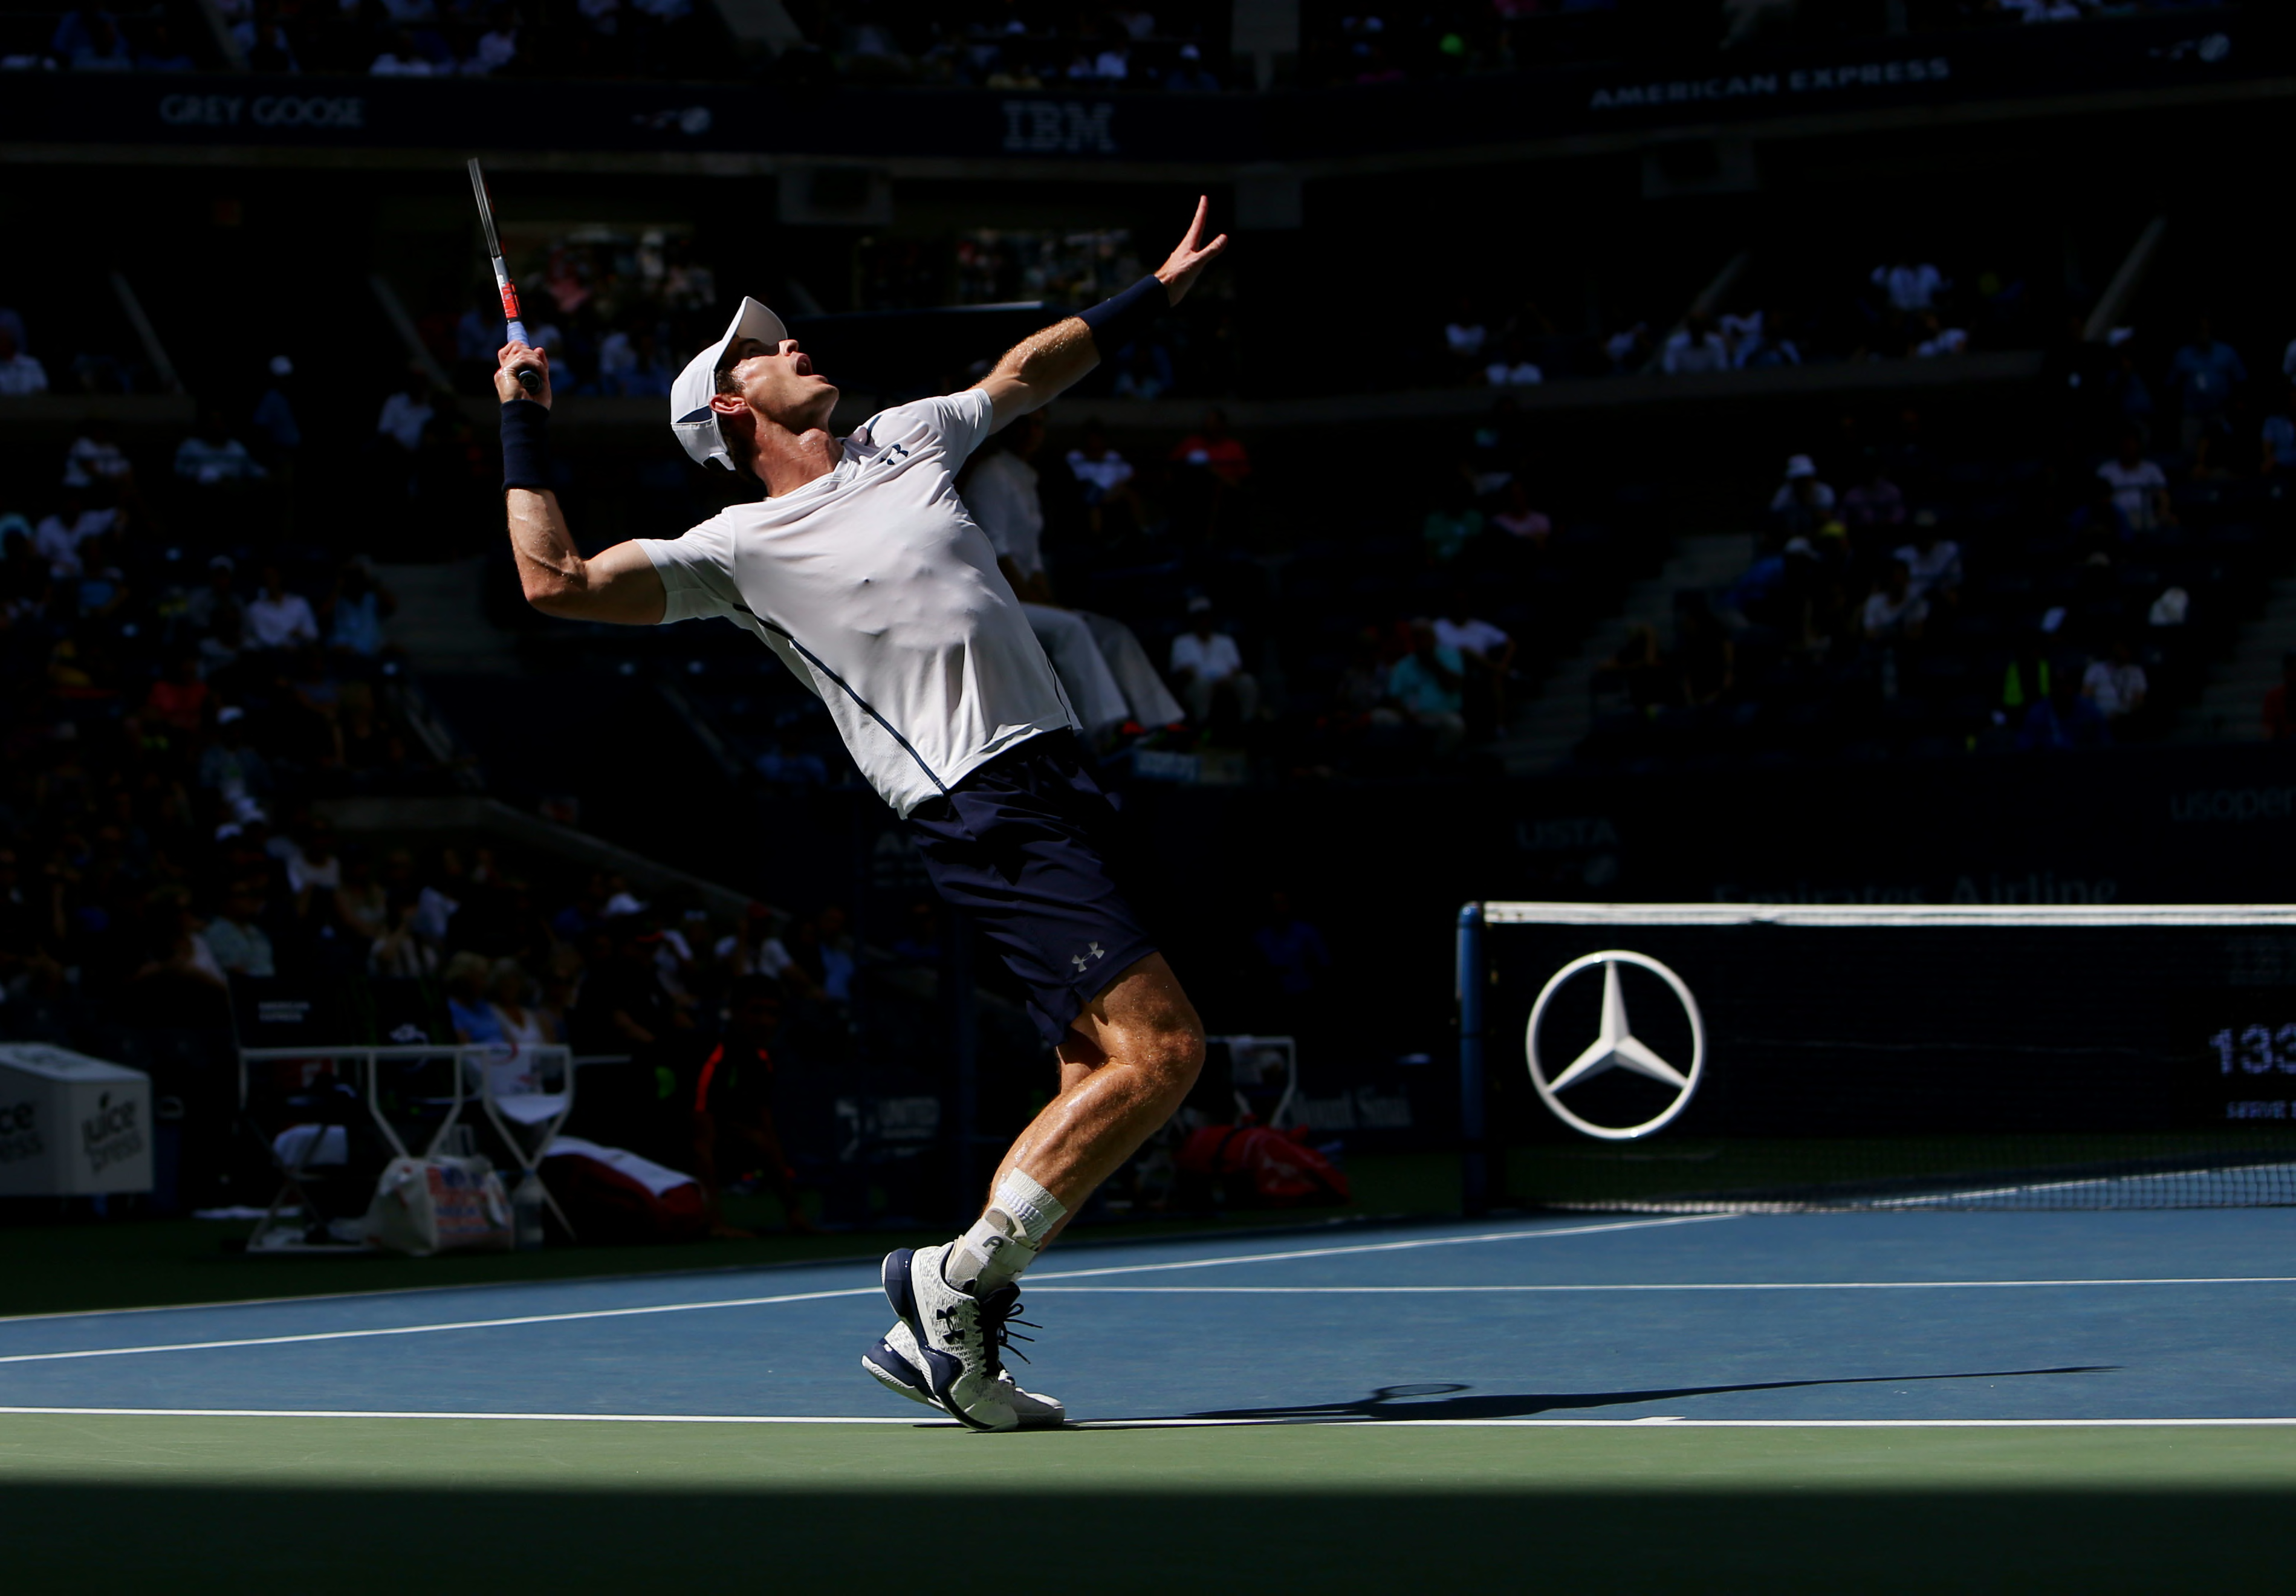 physicist brink tactics Andy Murray: pressure on his performance at Dubai Tennis Championships